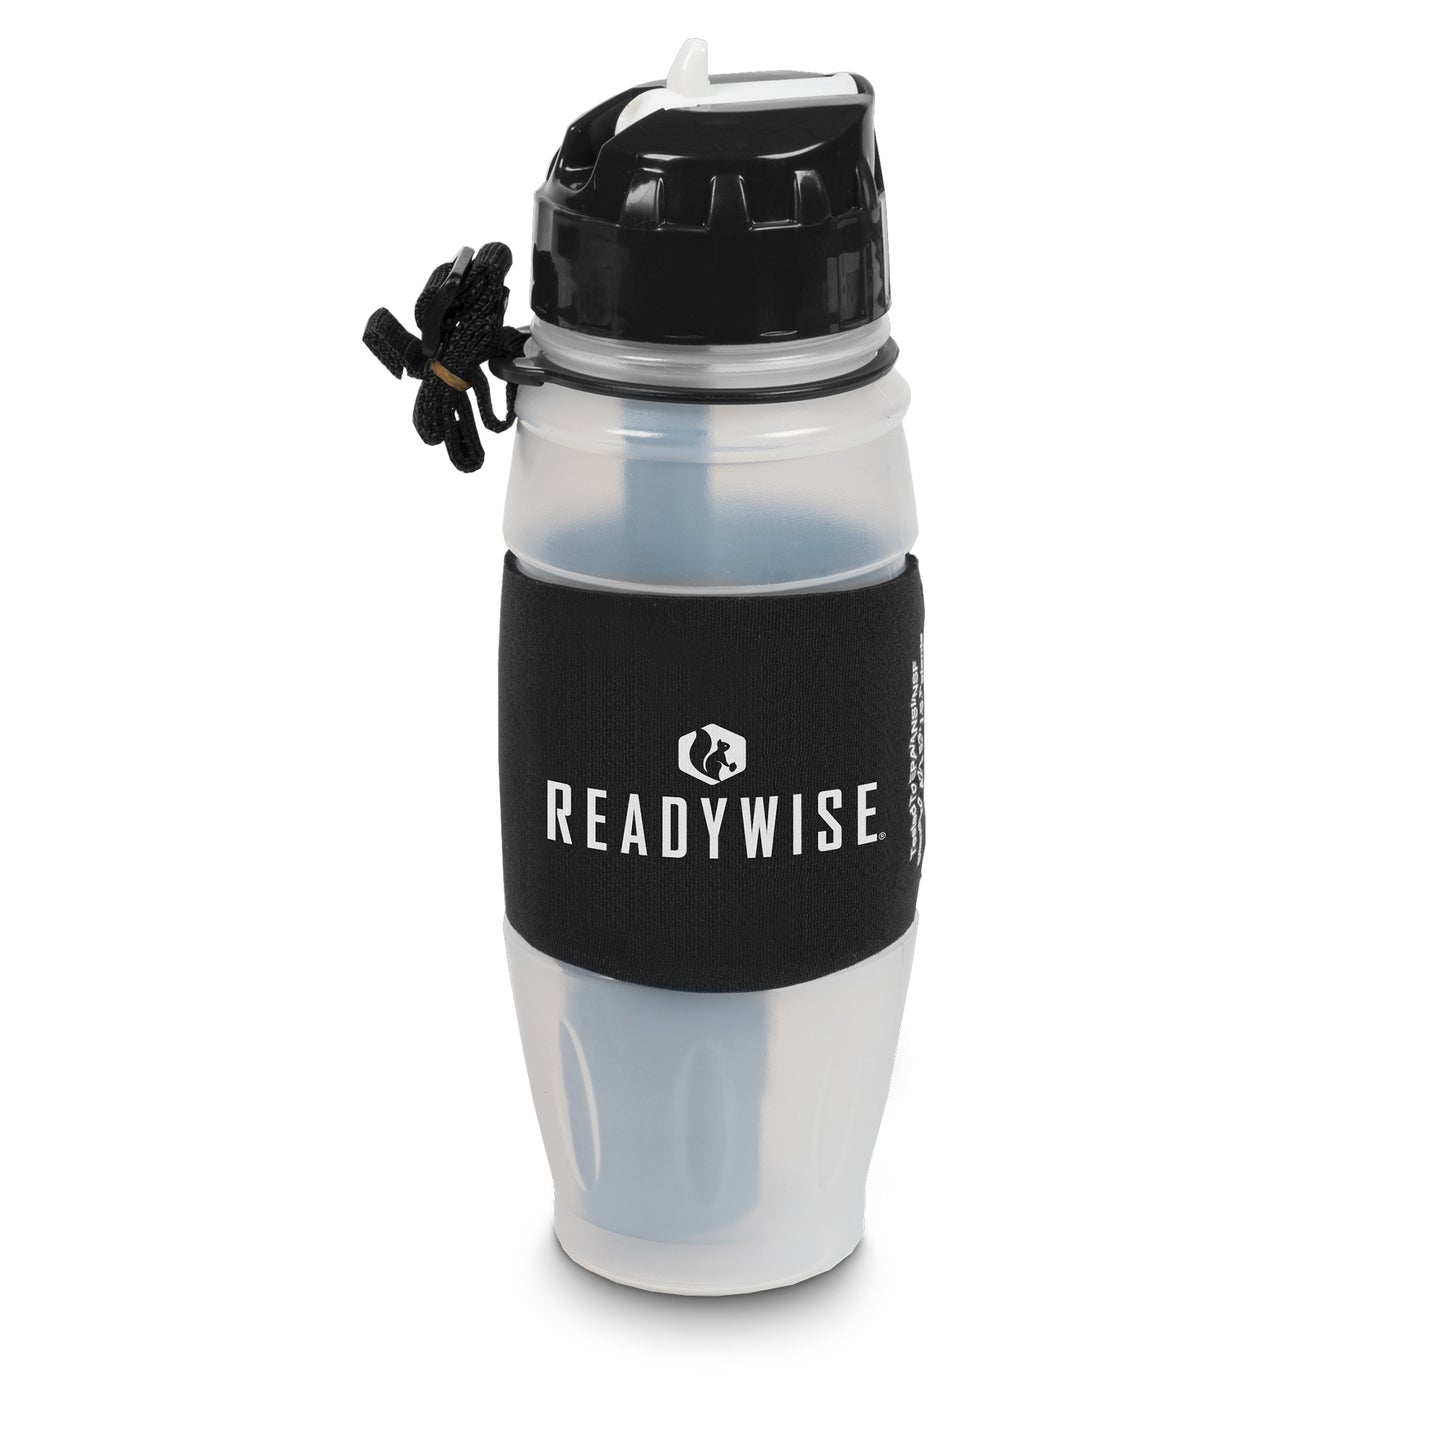 Water Purifier - Water Filtration Bottle - 28oz Camping Water Filter